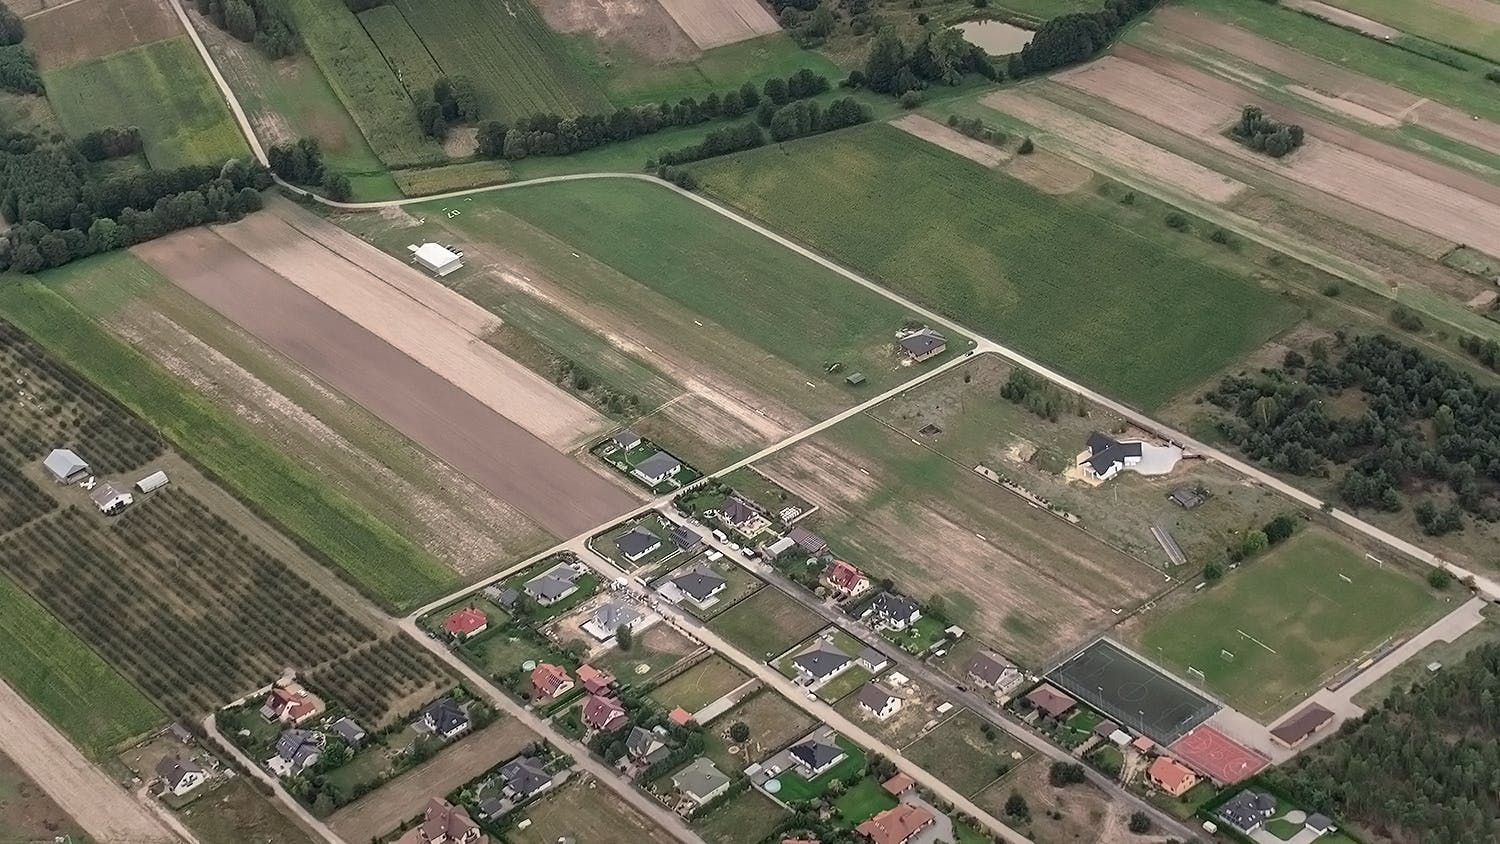 Chojeński, 2022. A bird's-eye view of the airfield. On the left, you can see the existing hangar and the cherry orchard. In the center, the runway and the new hangar are visible.